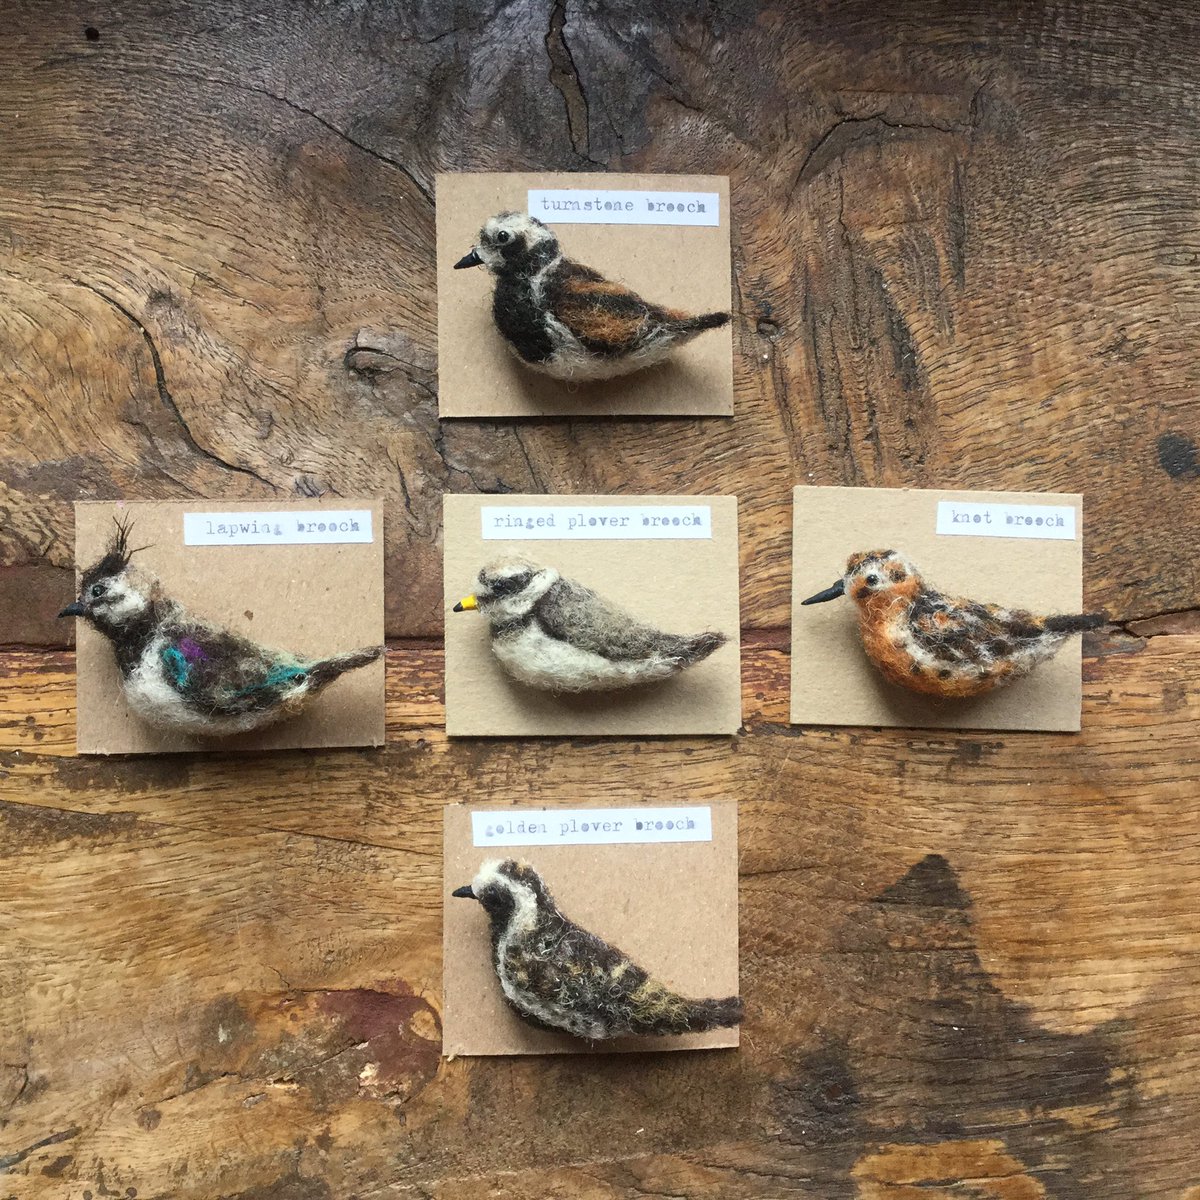 Sneak preview at some of the new wader brooches I have been working on
#turnstone #lapwing #ringedplover #knot #goldenplover .
.
#needlefelt #waders #britishwaders #feltbirds #britishbirds #birdlover #feltartist #needlefeltingartist #wetlands #feltbrooches #wildlifeart #wildlife